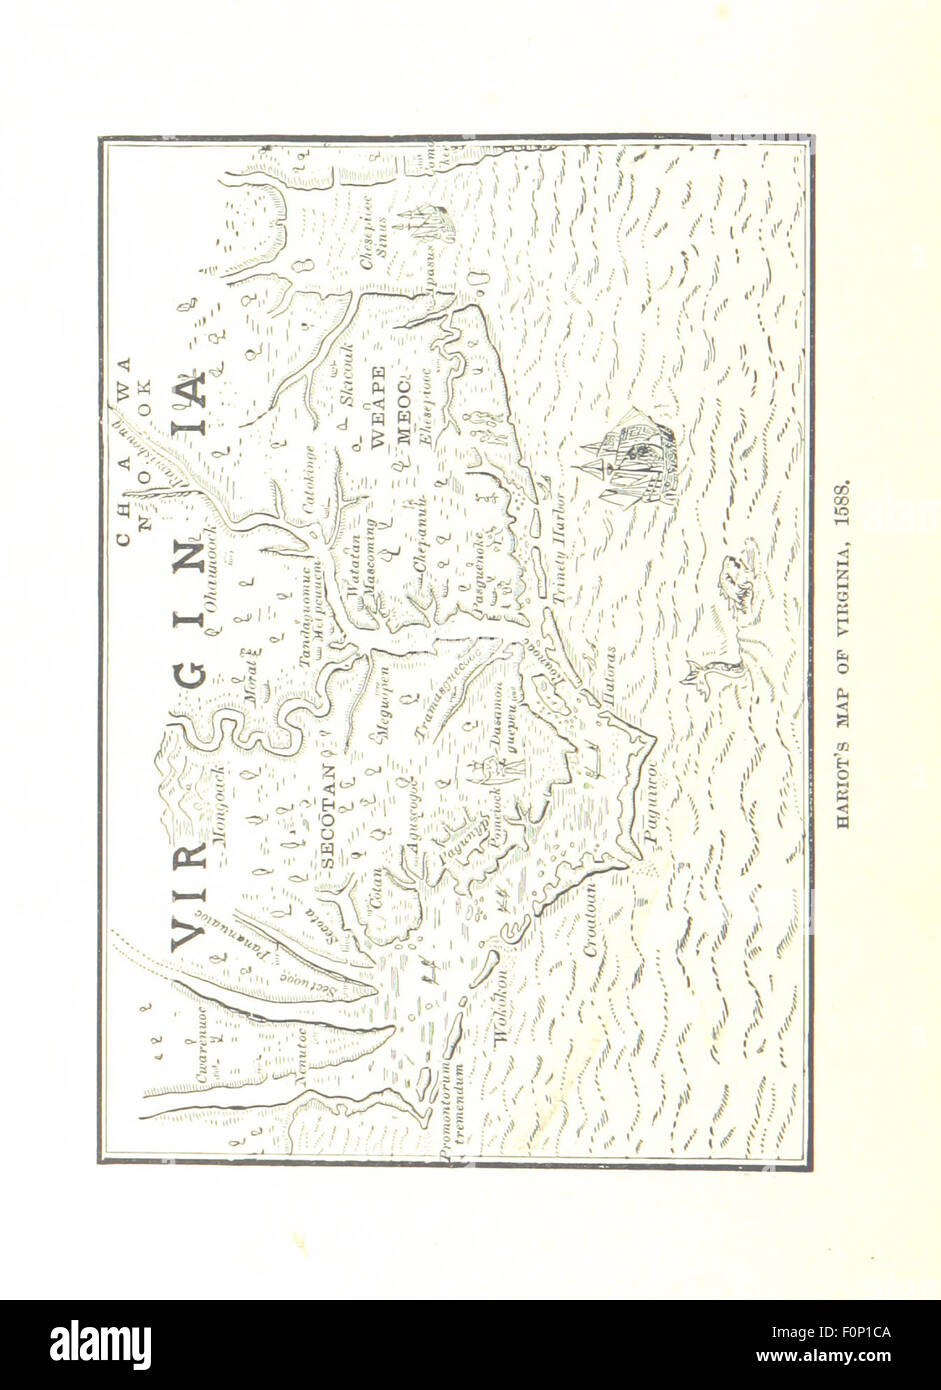 The Making of Virginia and the Middle Colonies. 1578-1701 ... With many illustrations and maps Image taken from page 40 of 'The Making of Virginia Stock Photo